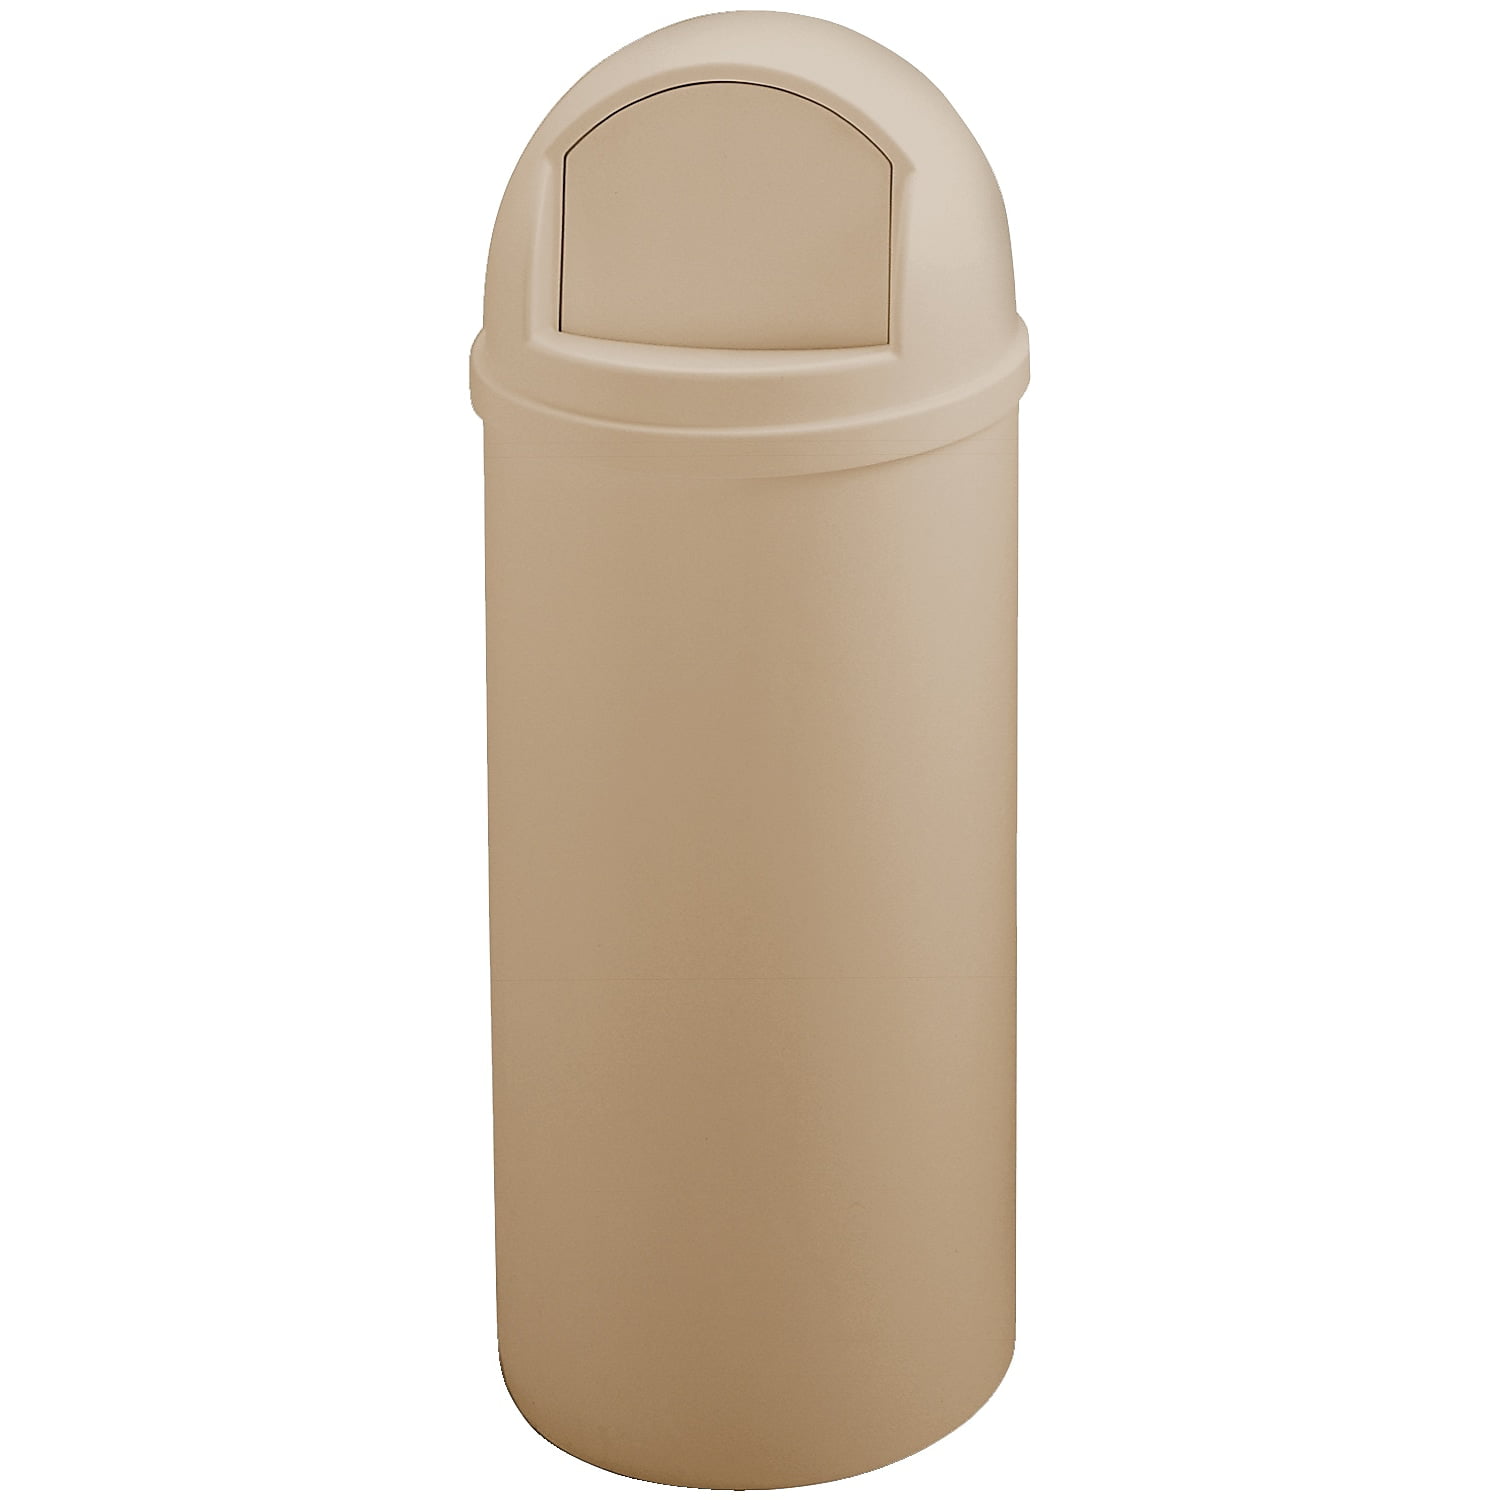 Rubbermaid Marshal 15 Gal Brown Plastic Round Trash Can